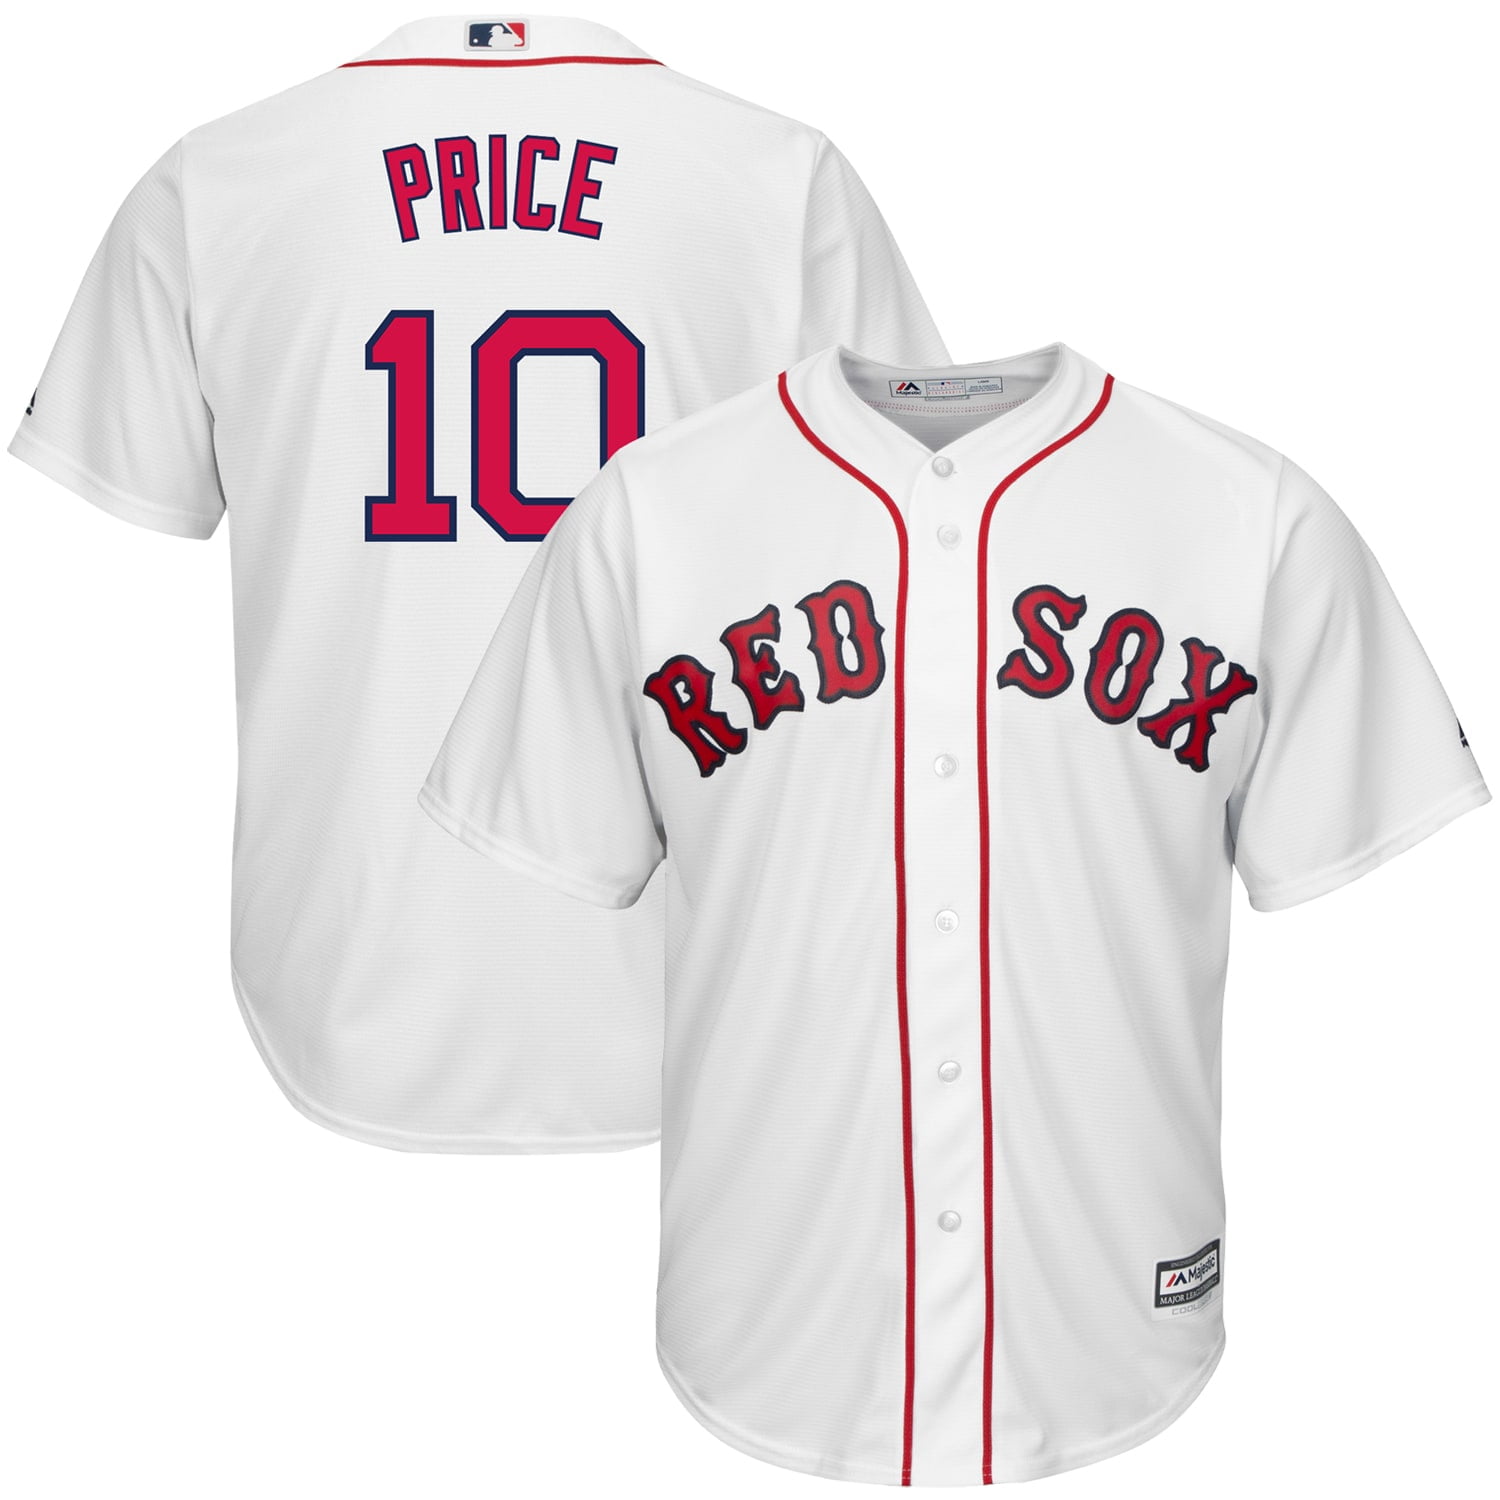 red sox hockey style jersey